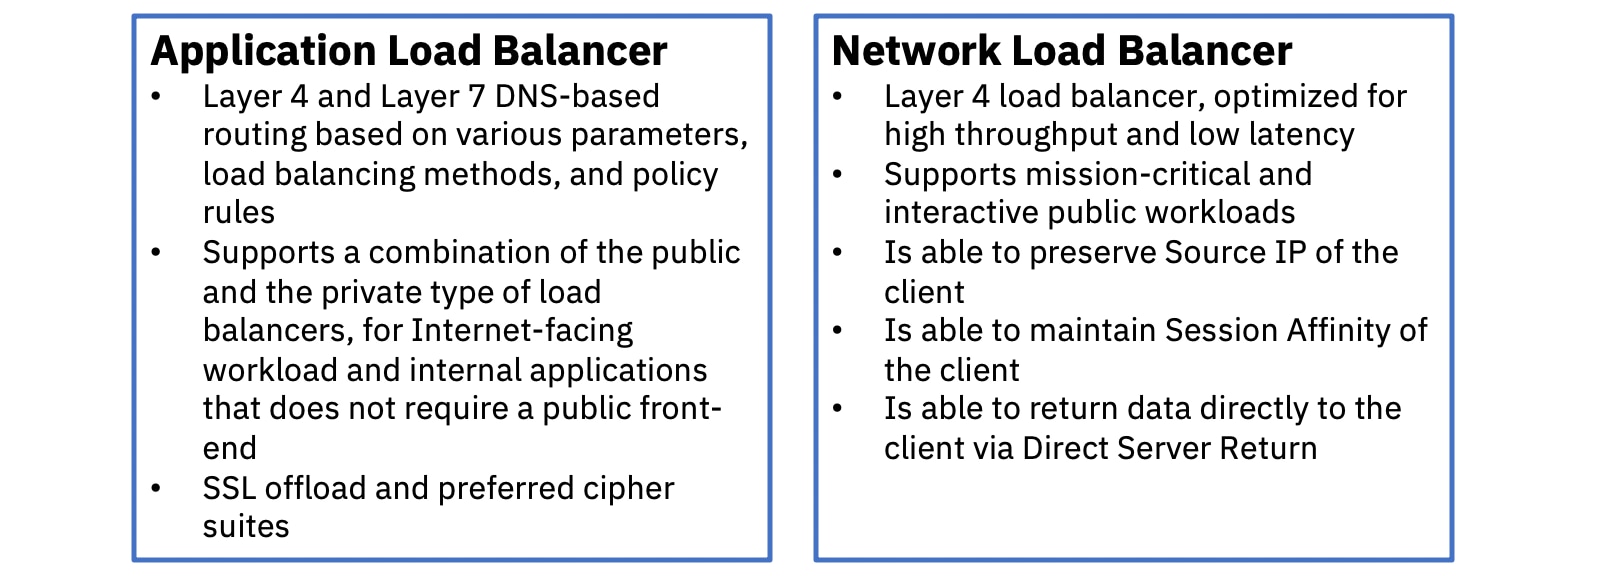 Network Load Balancer Now Generally Available on IBM Cloud VPC - IBM Blog